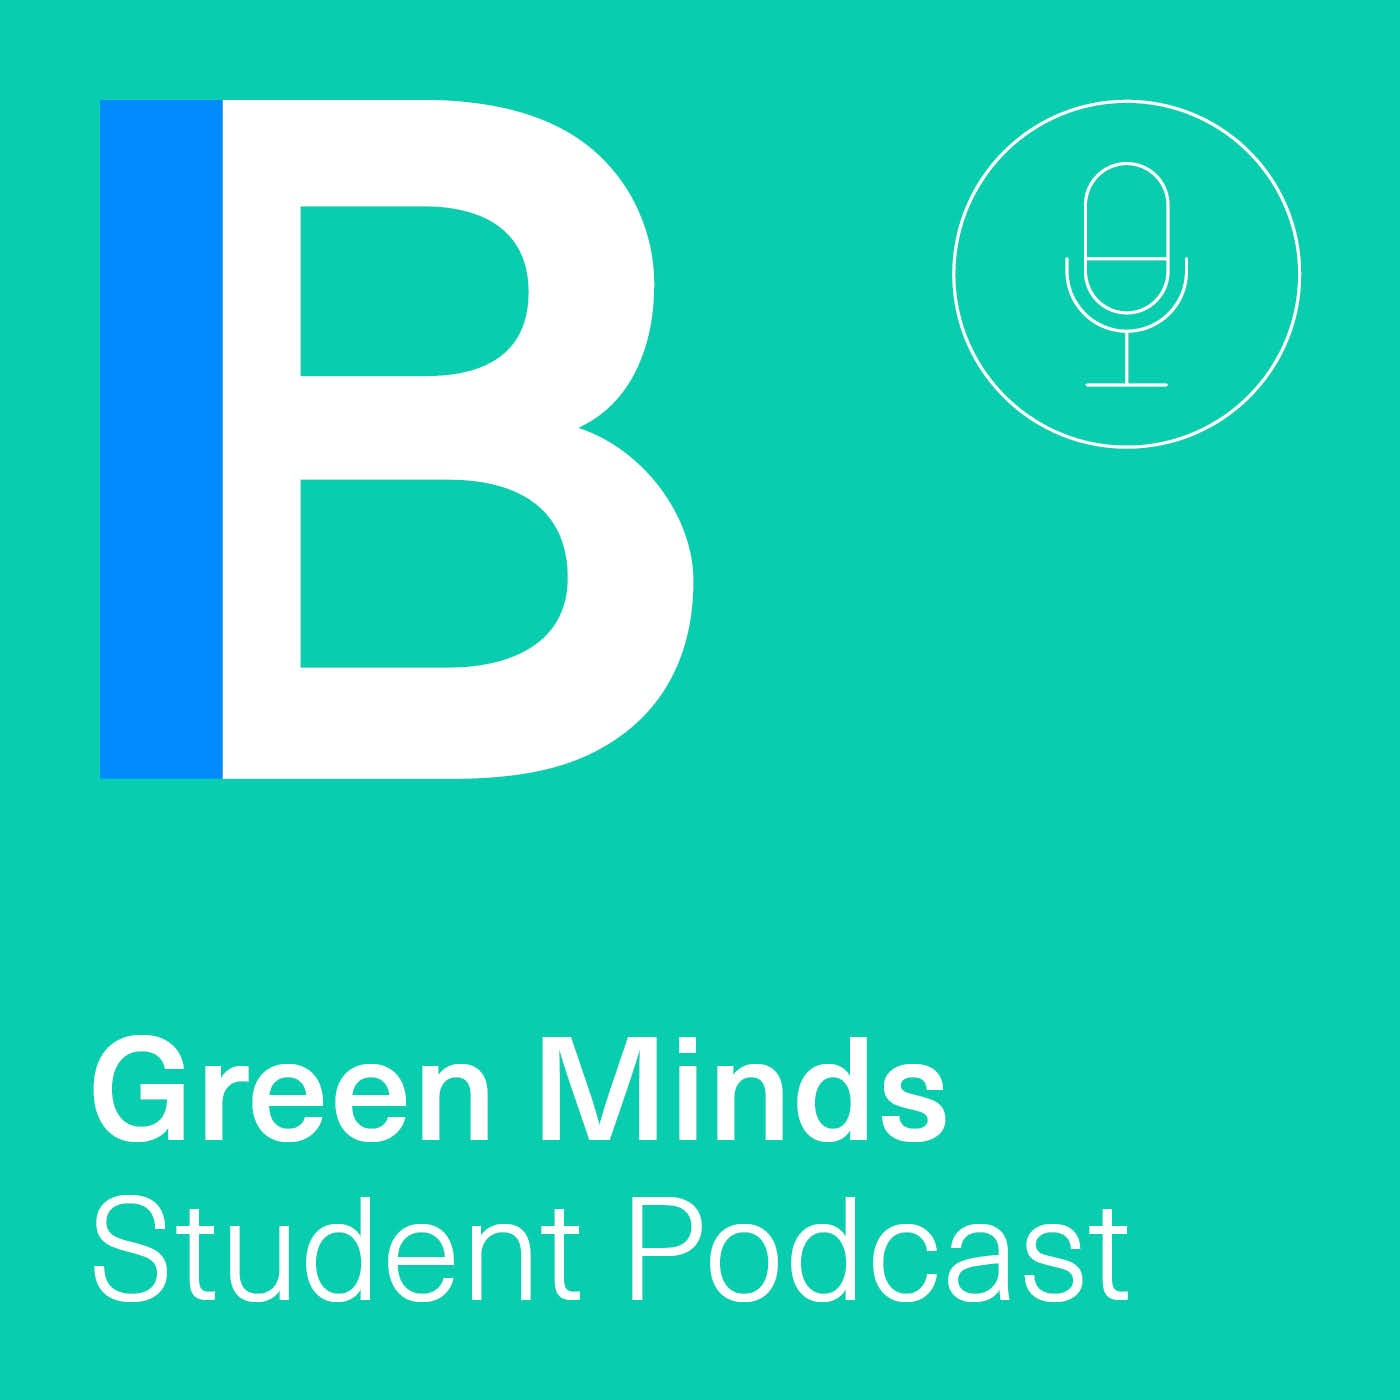 IB Green Minds 25: In conversation with Tim Turner, Part 2